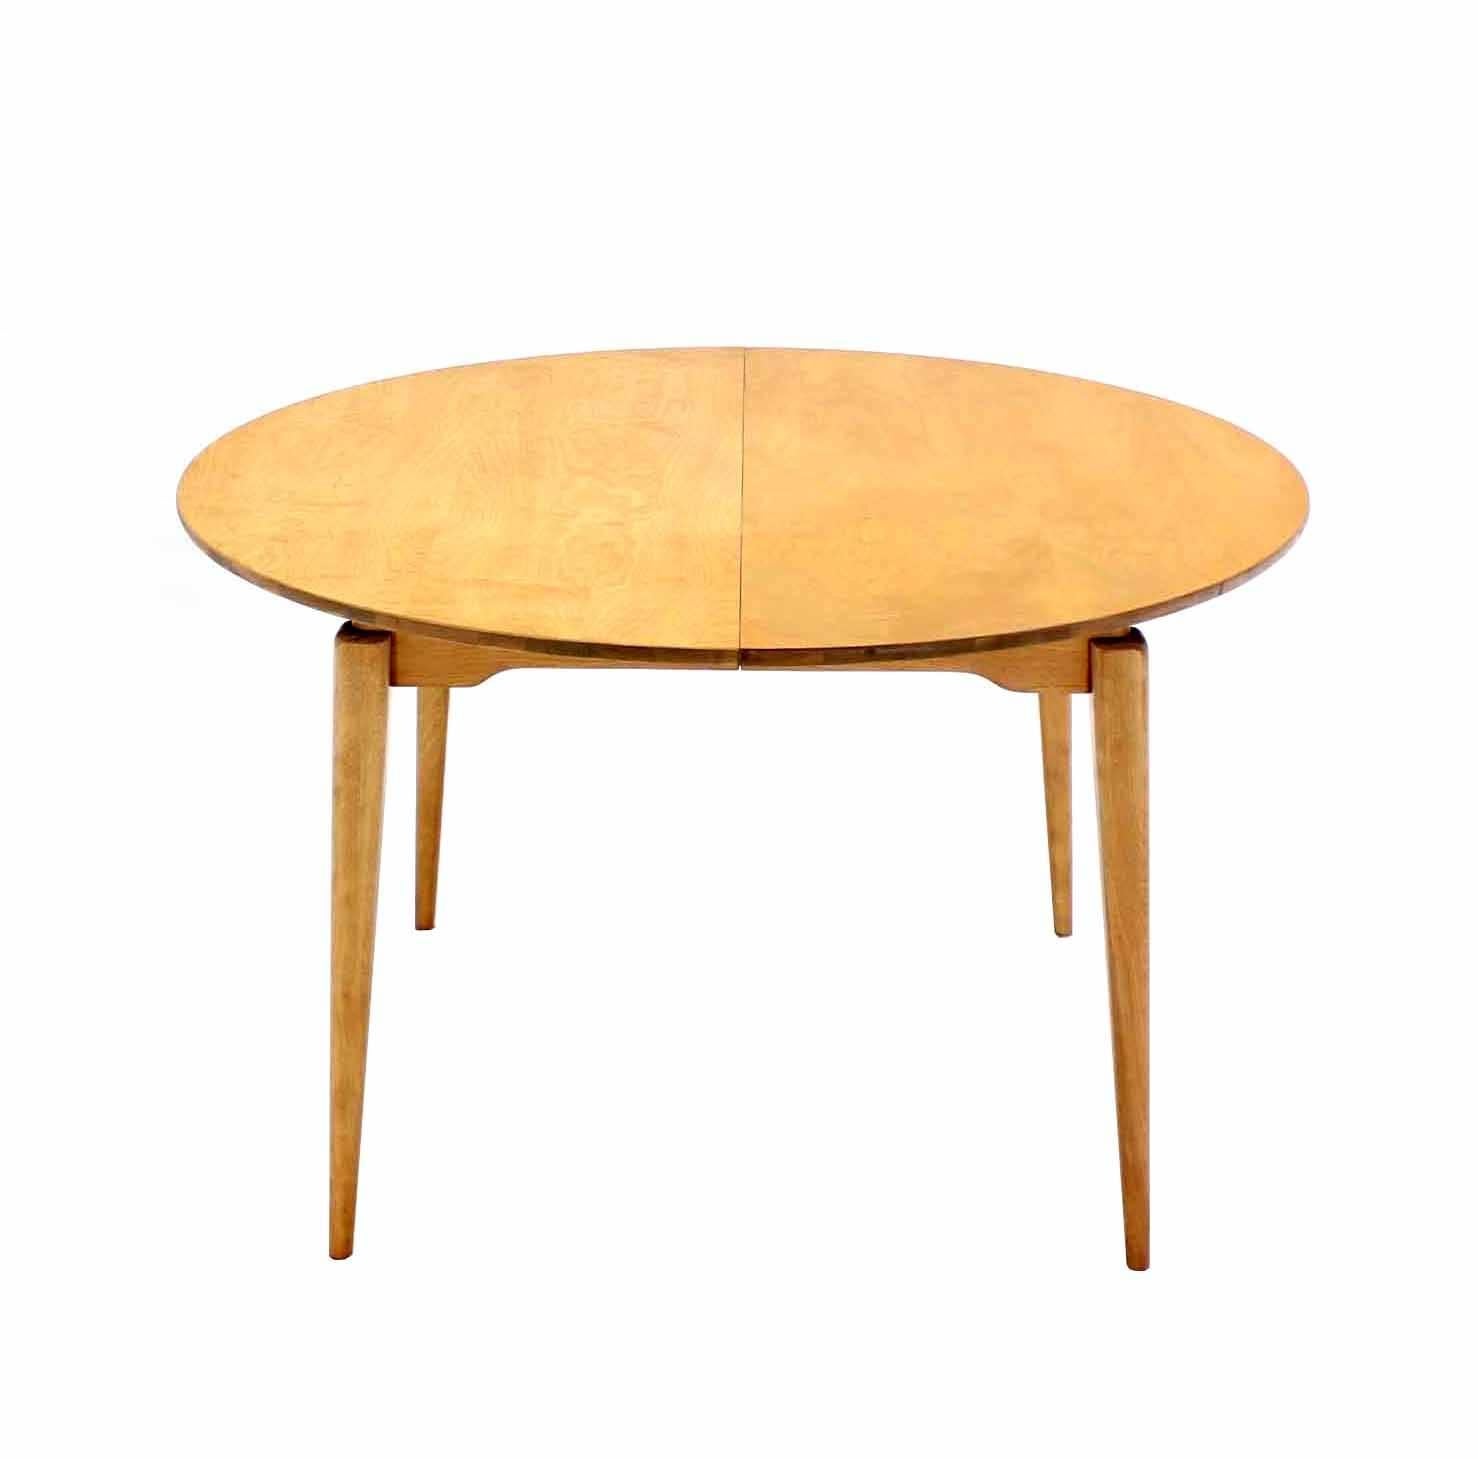 Possibly Risom design round birch table 3 x 10" leaves.